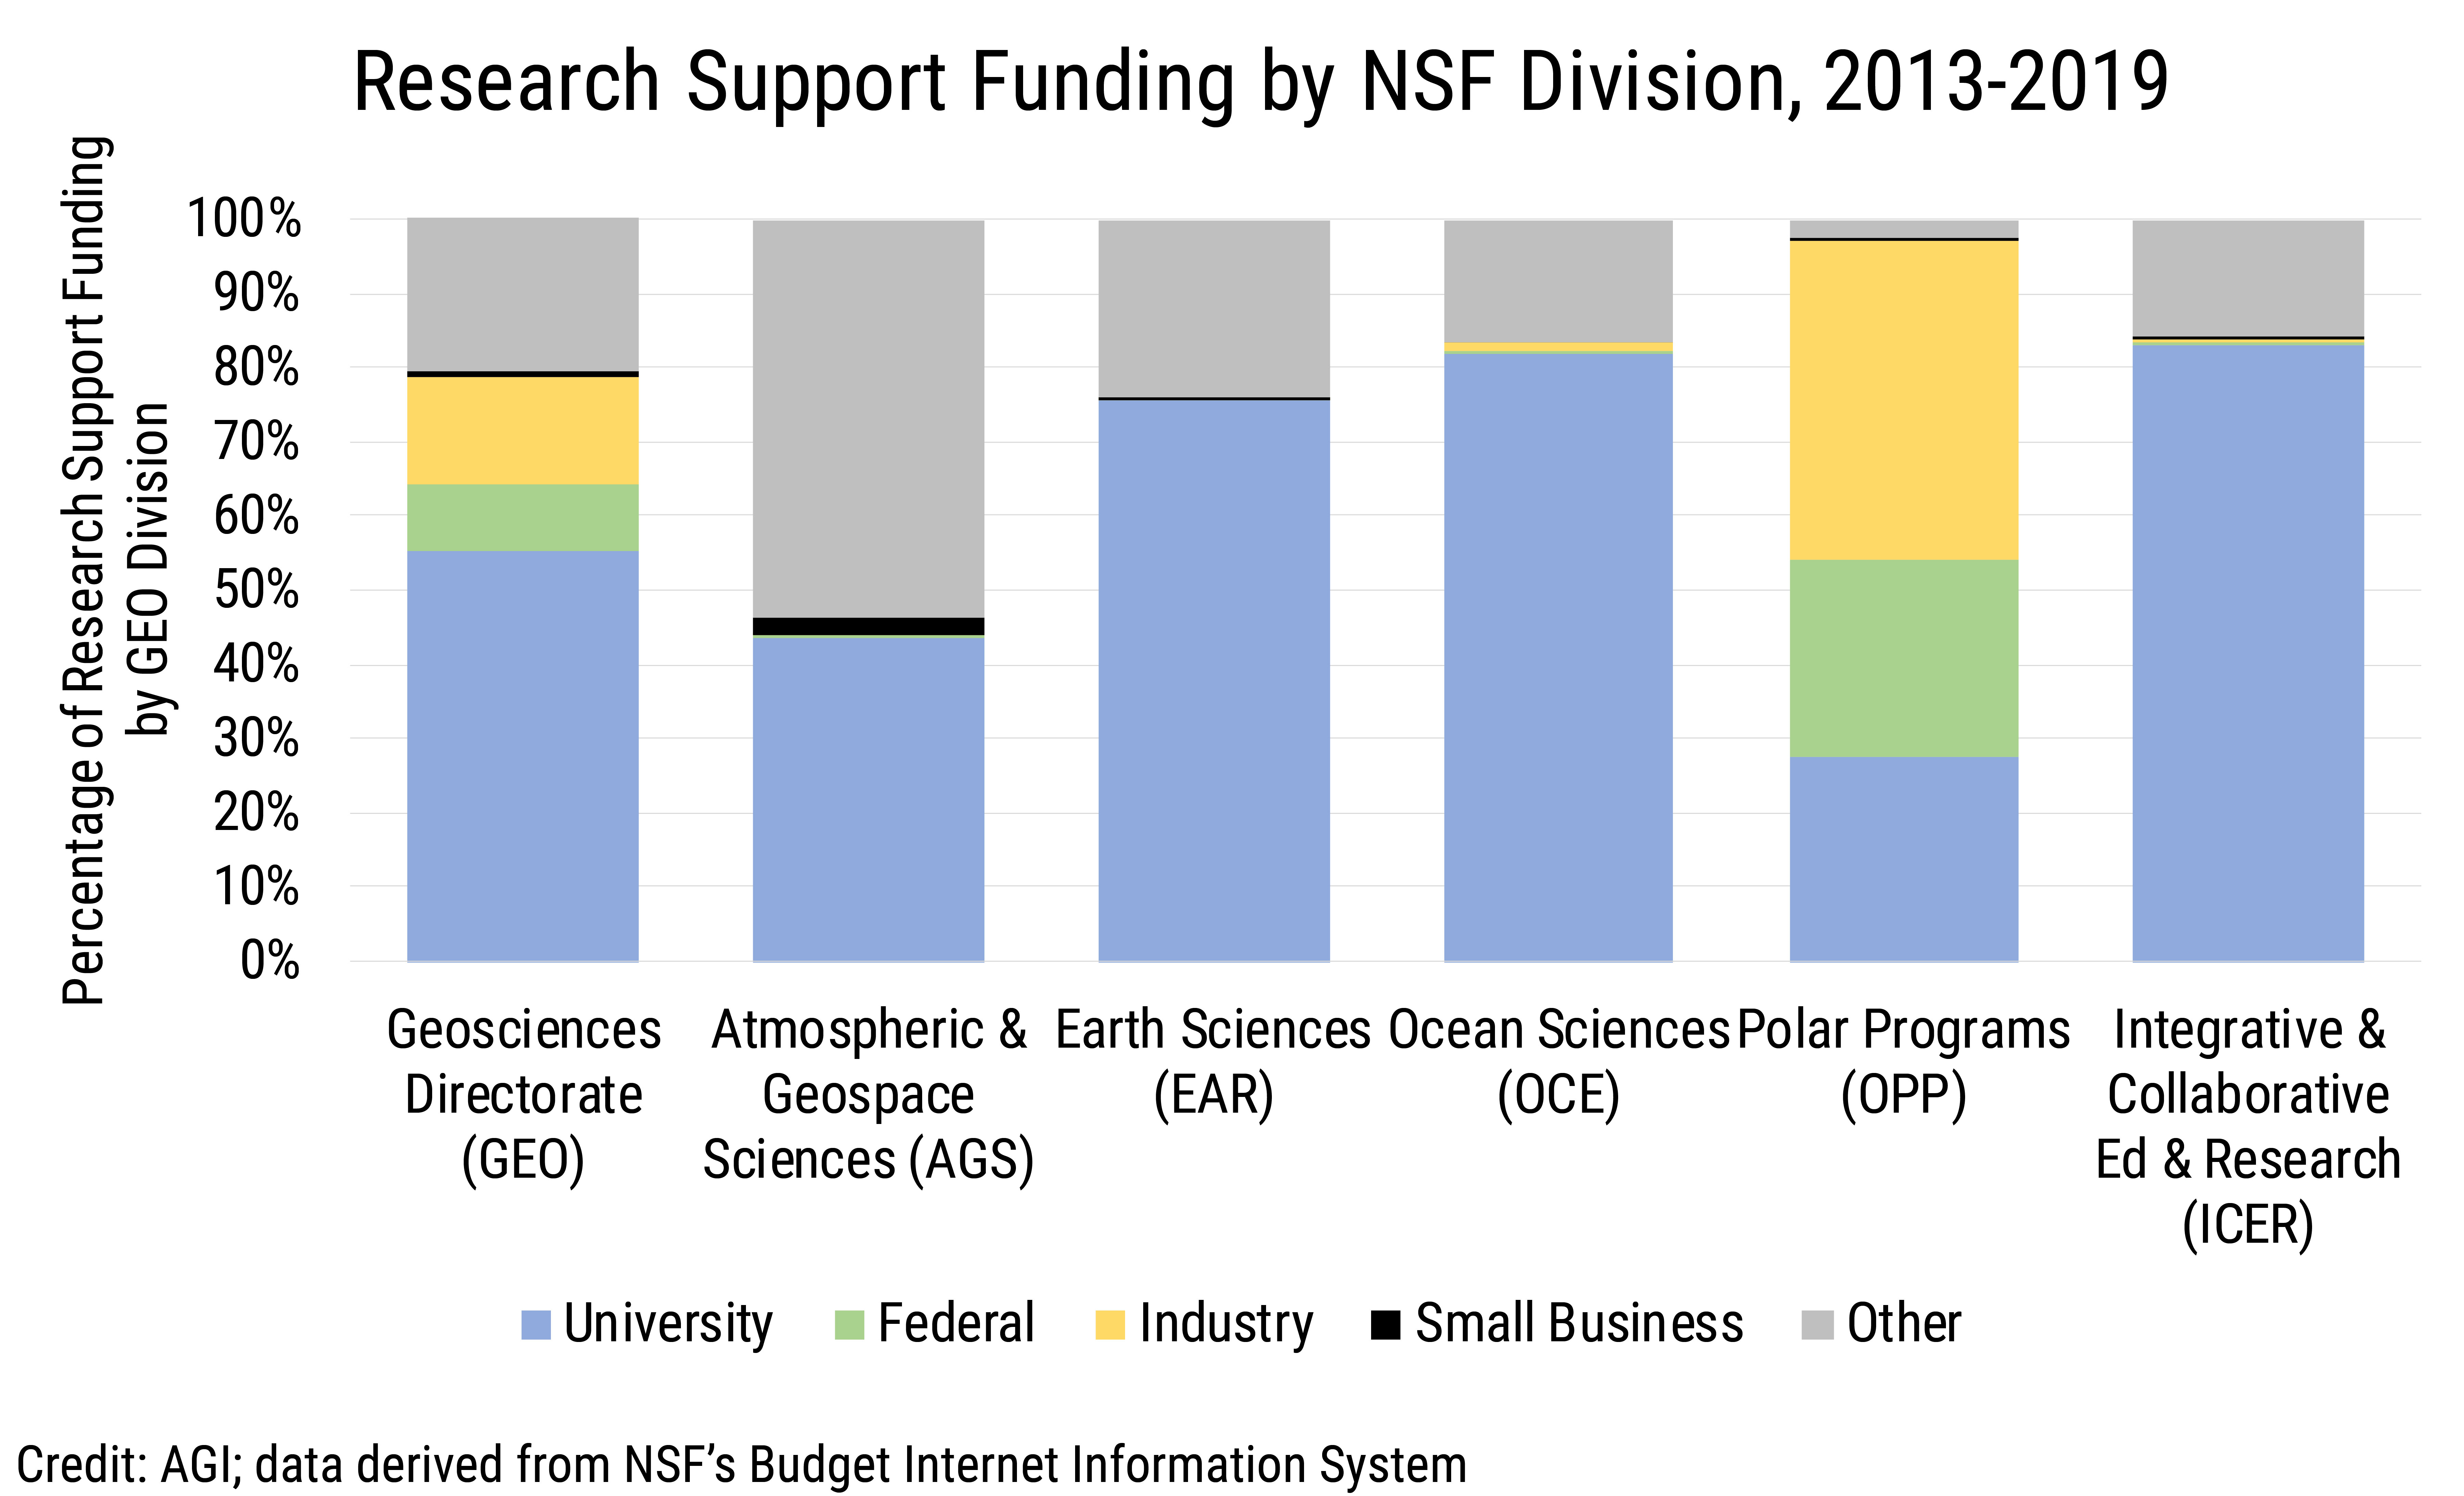 Data Brief 2020-001 chart 03: Research Support Funding by NSF Division, 2013-2019 (credit: AGI; data derived from NSF BIIS)